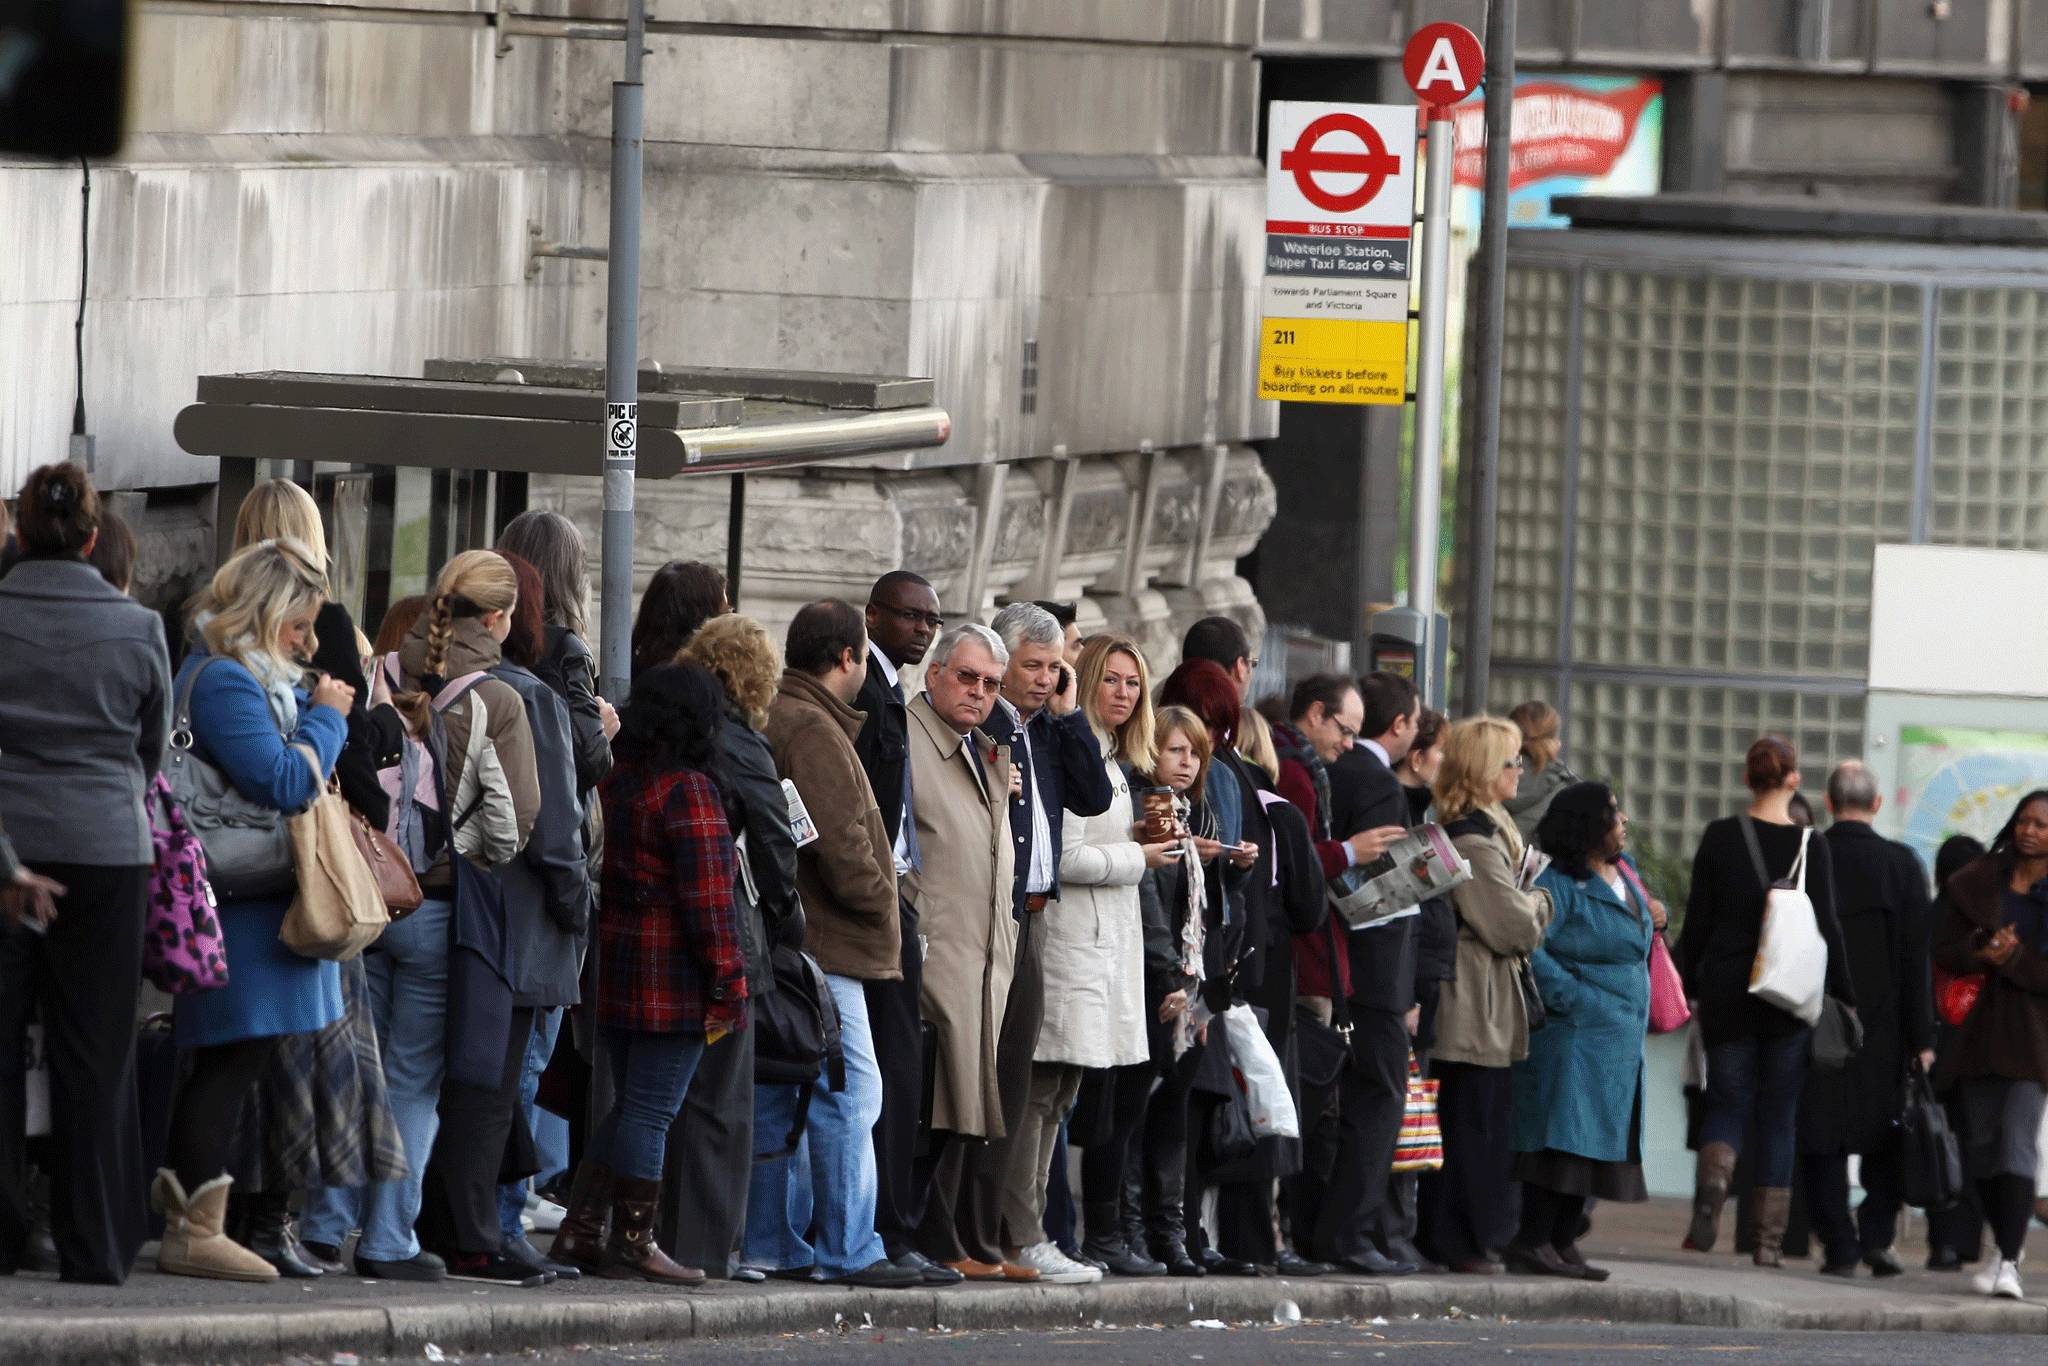 Over 100 buses will be added in a bid to combat queues (Getty)